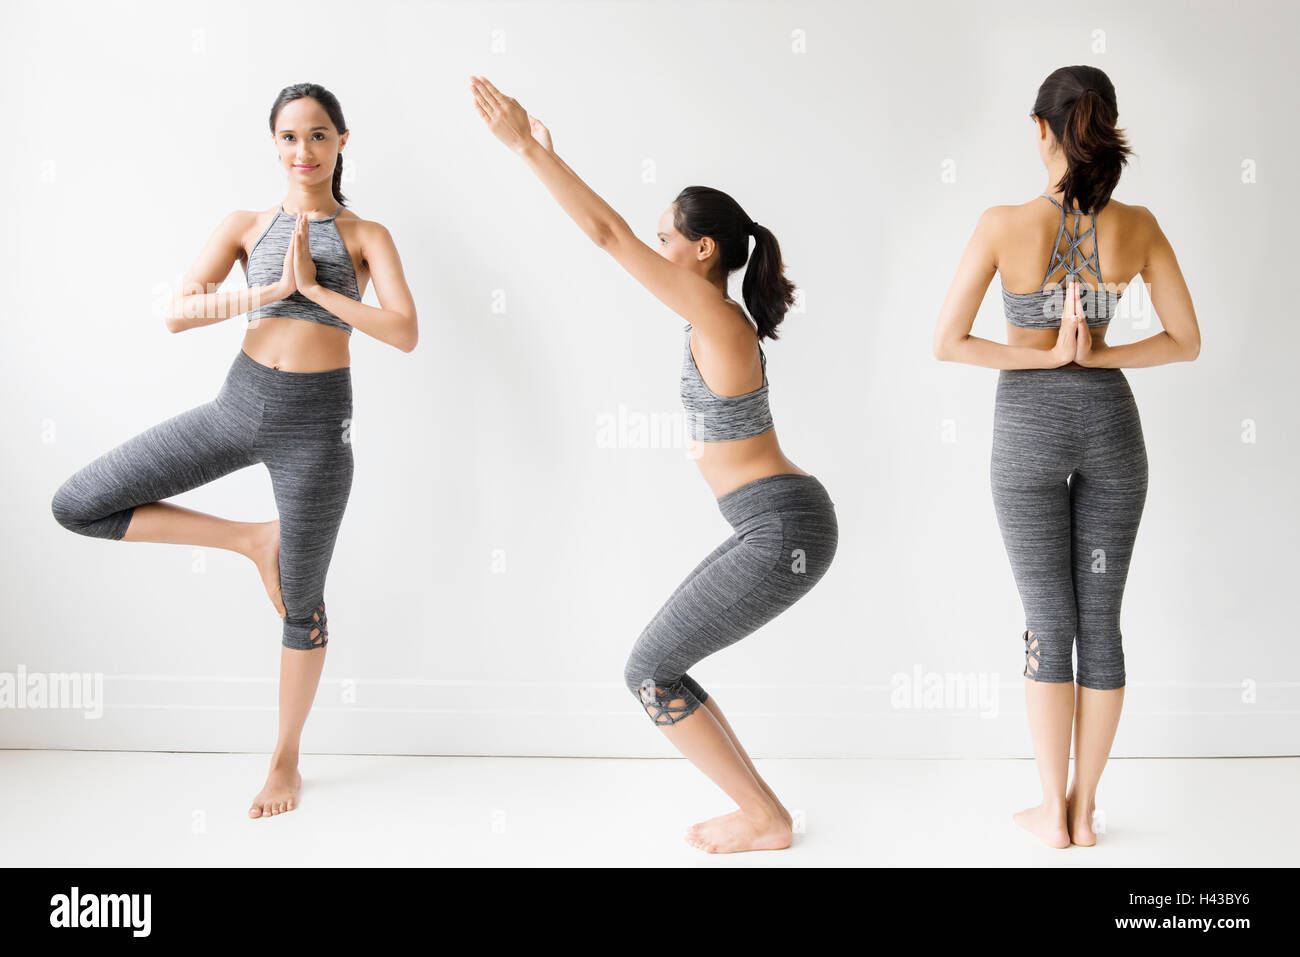 Series of Mixed Race woman doing yoga poses Stock Photo